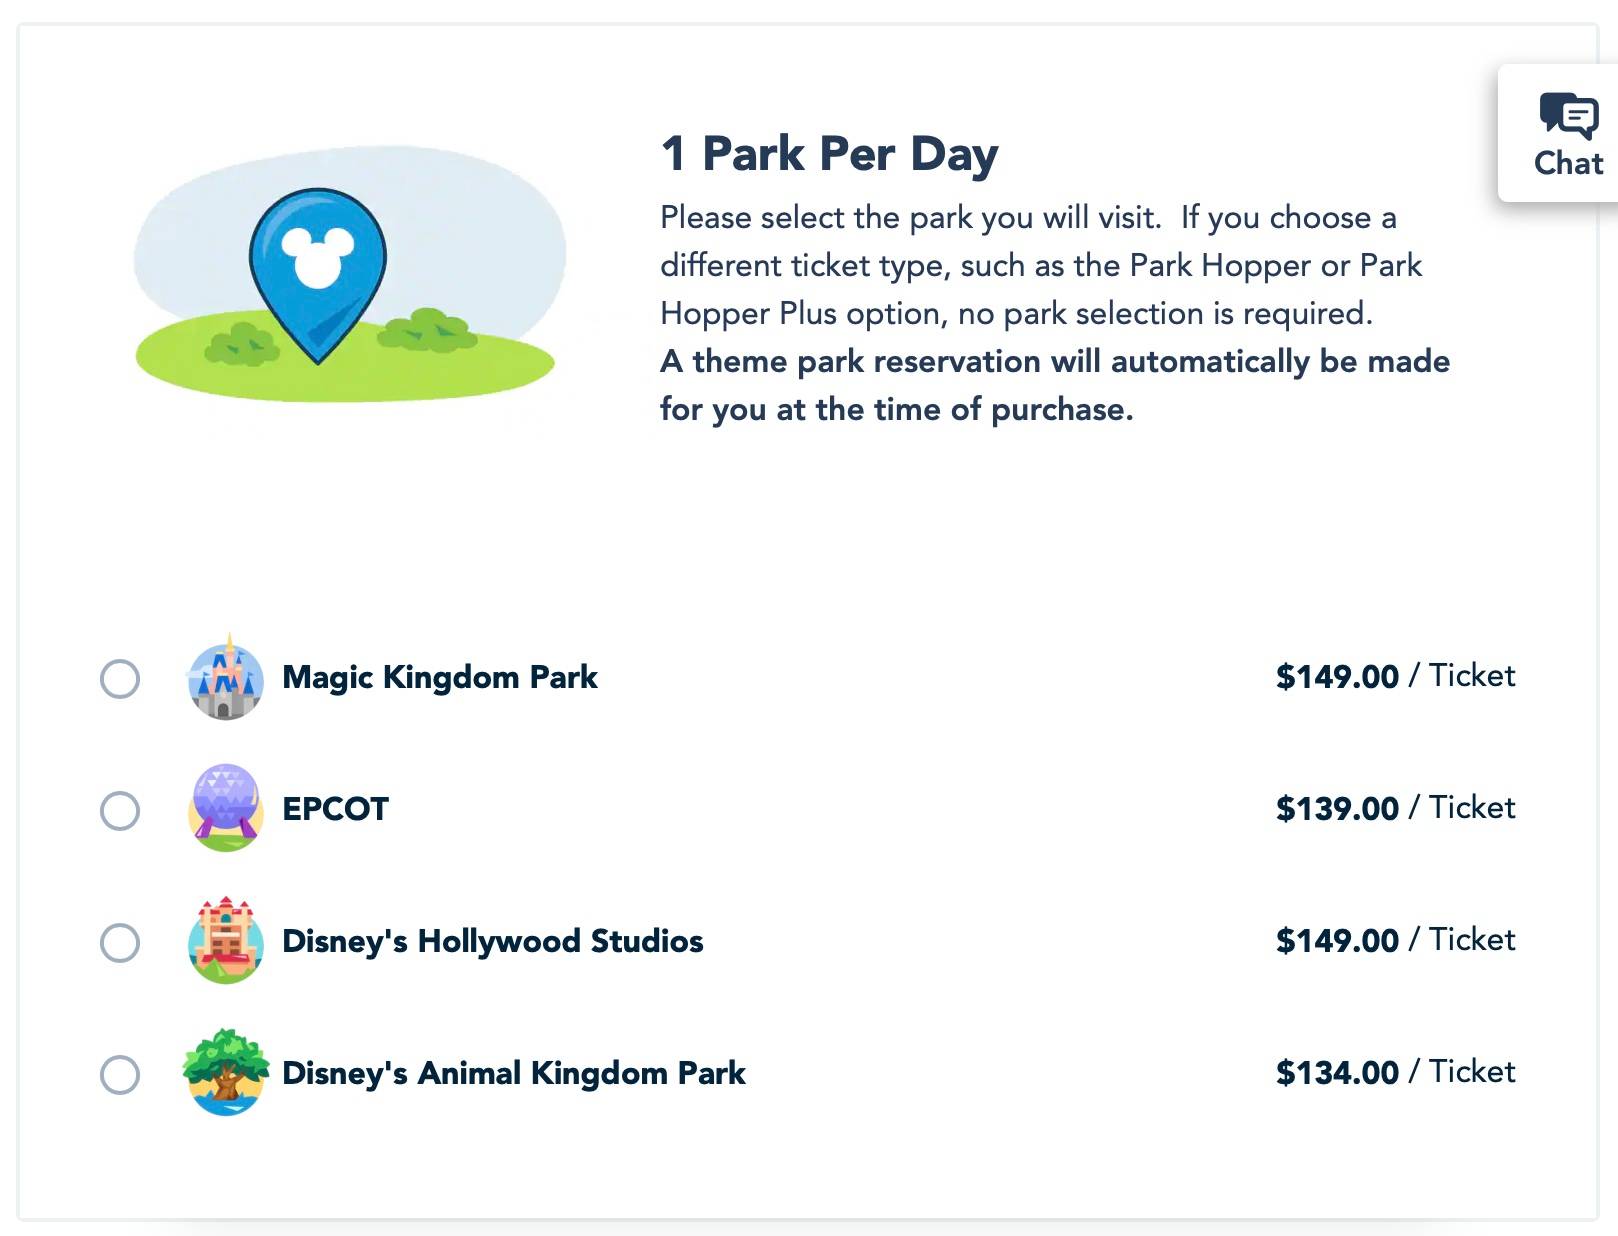 Disney World price increases go into effect today across all four theme parks